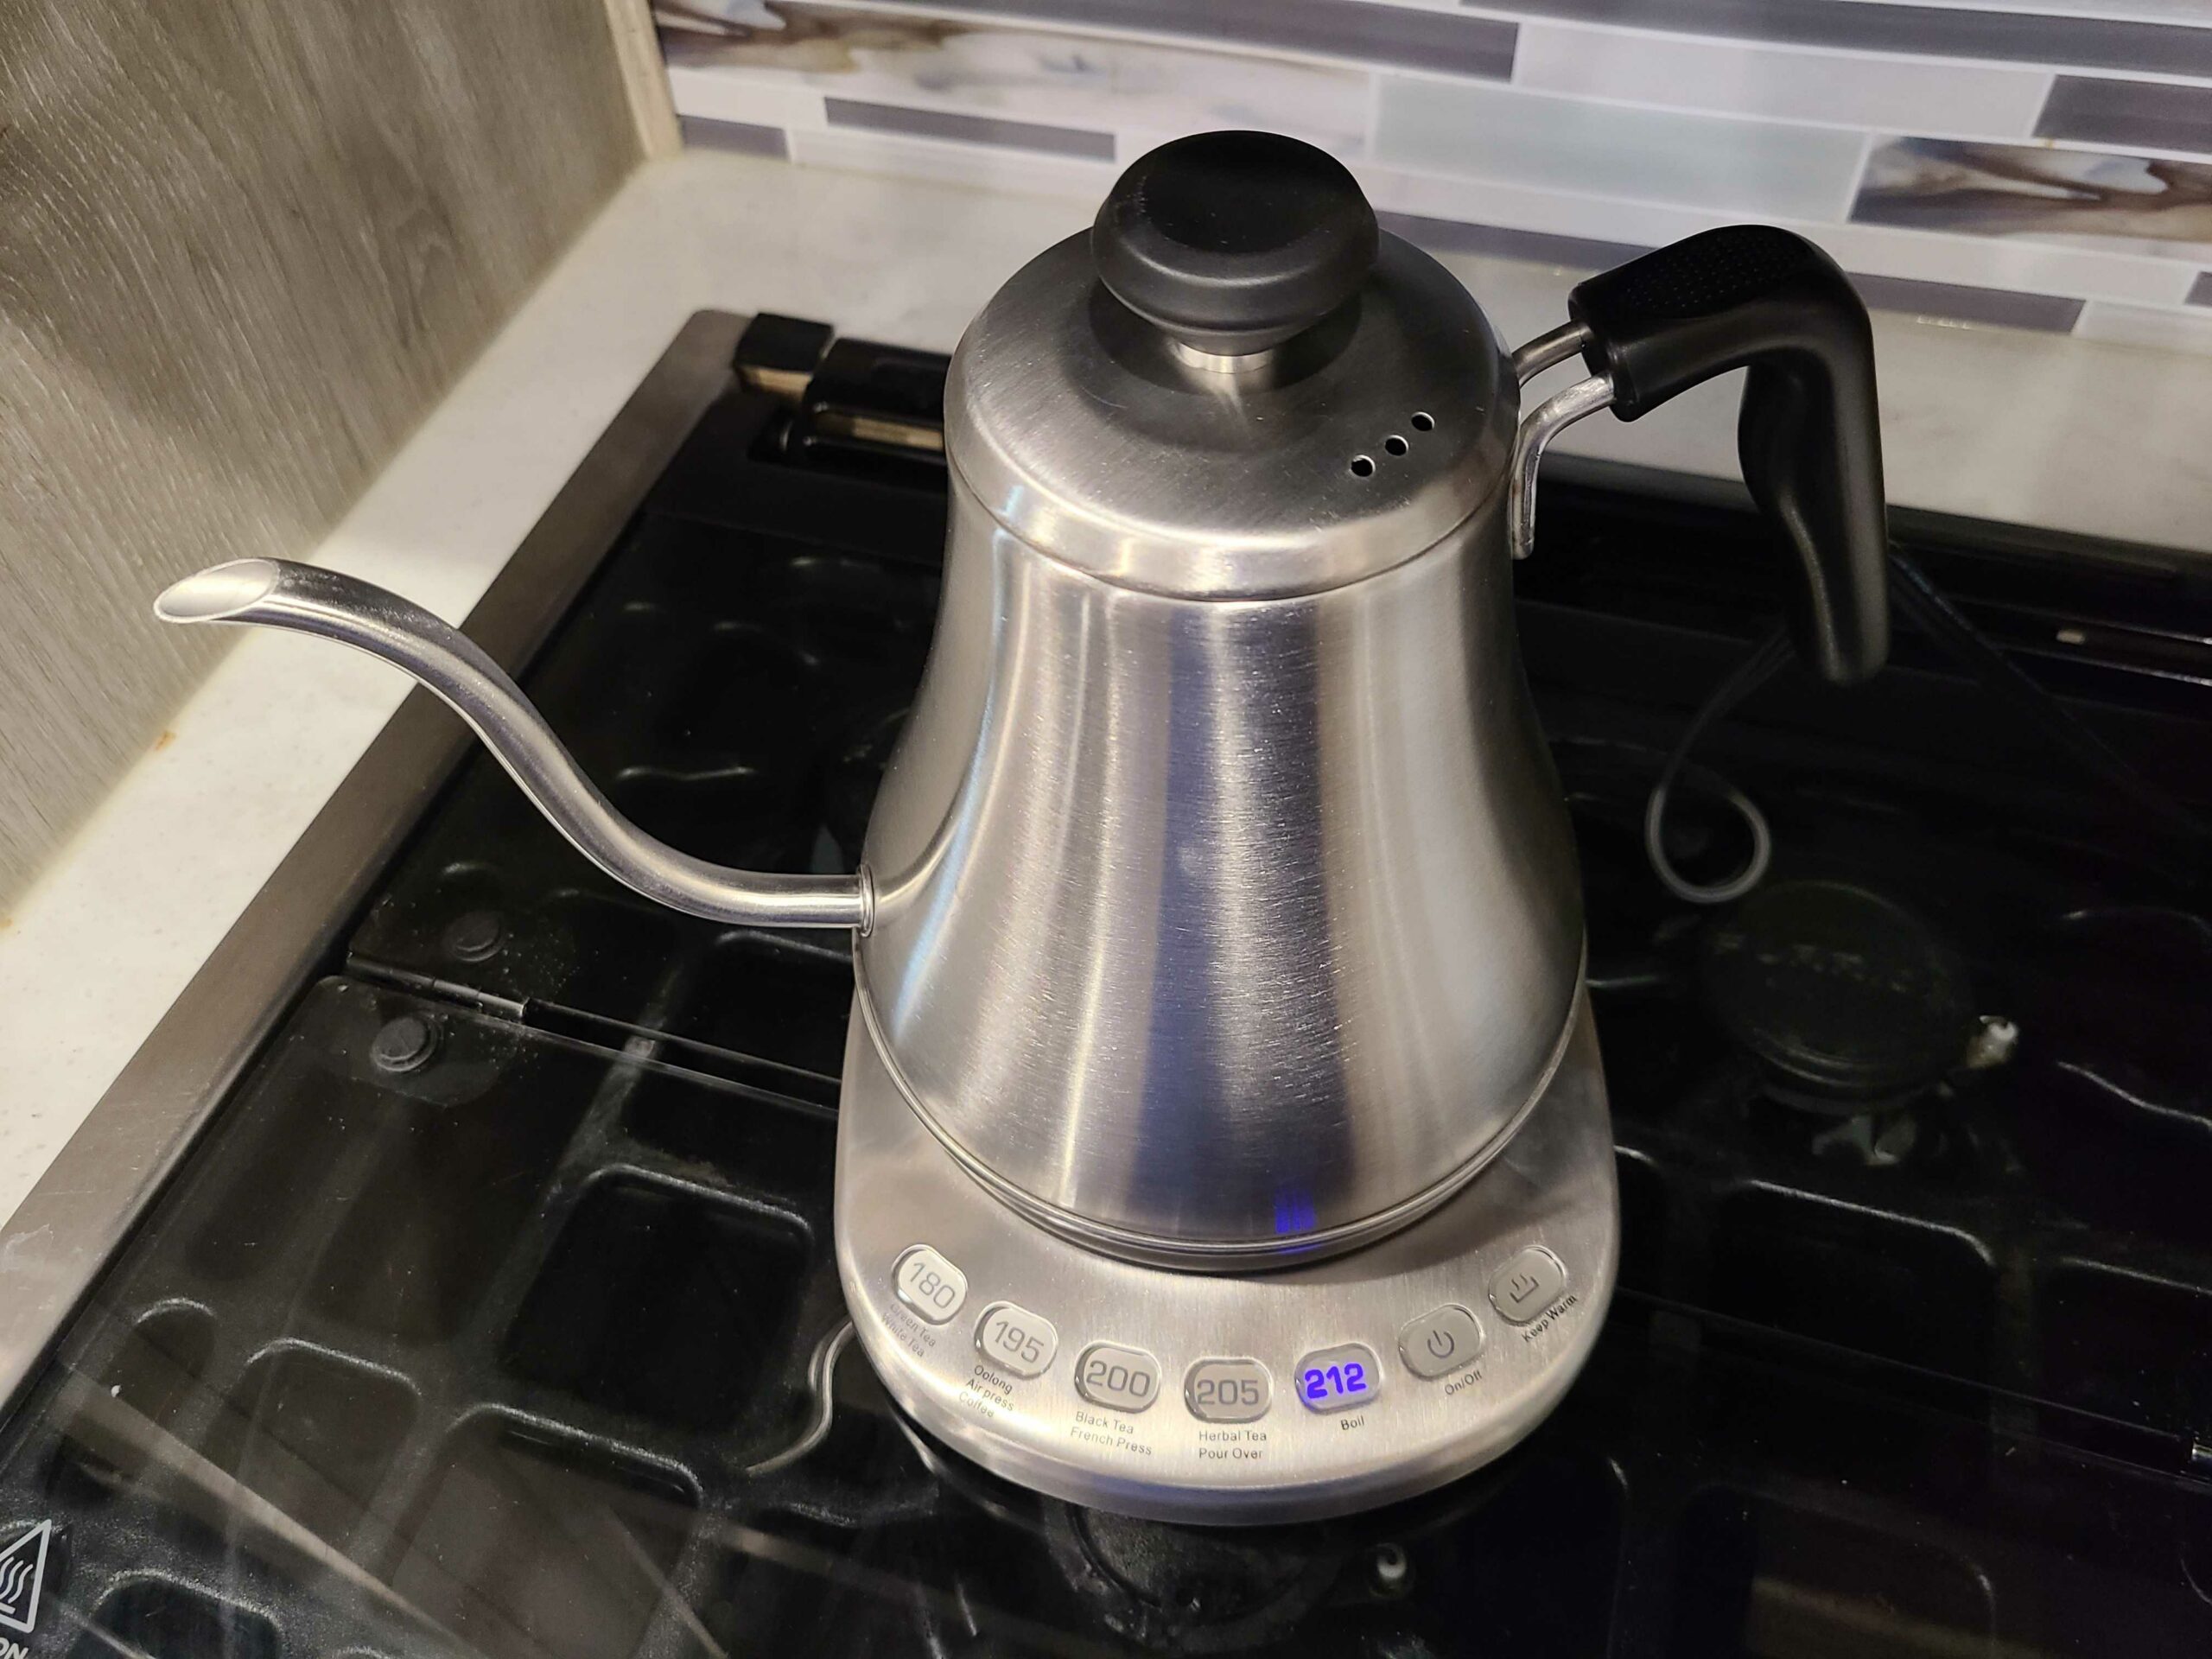 electric gooseneck stainless steel kettle with control panel base